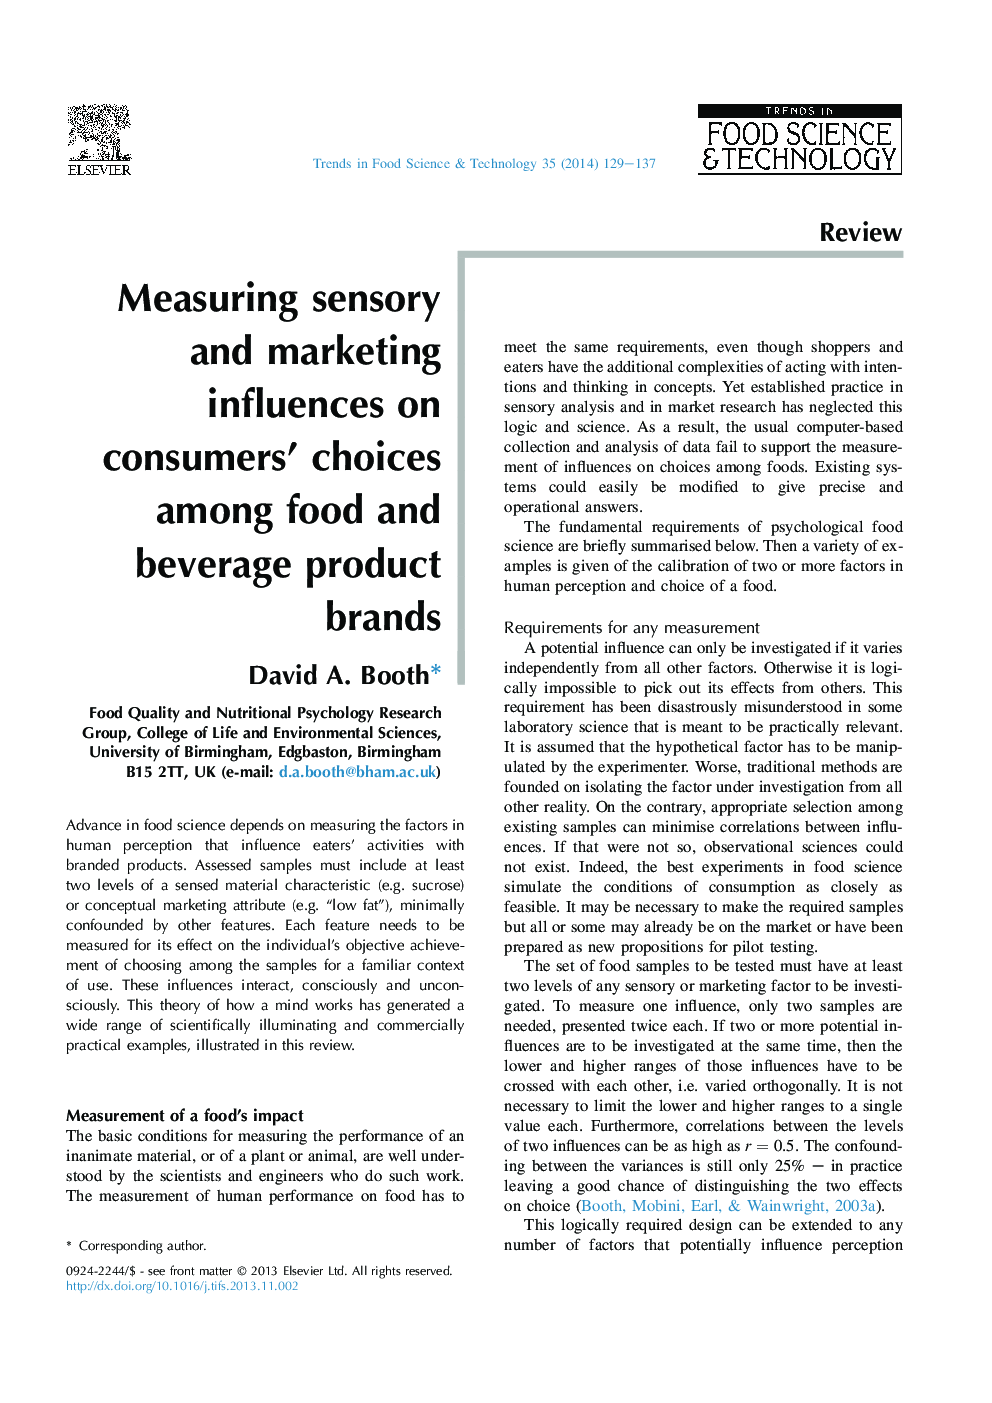 Measuring sensory and marketing influences on consumers' choices among food and beverage product brands